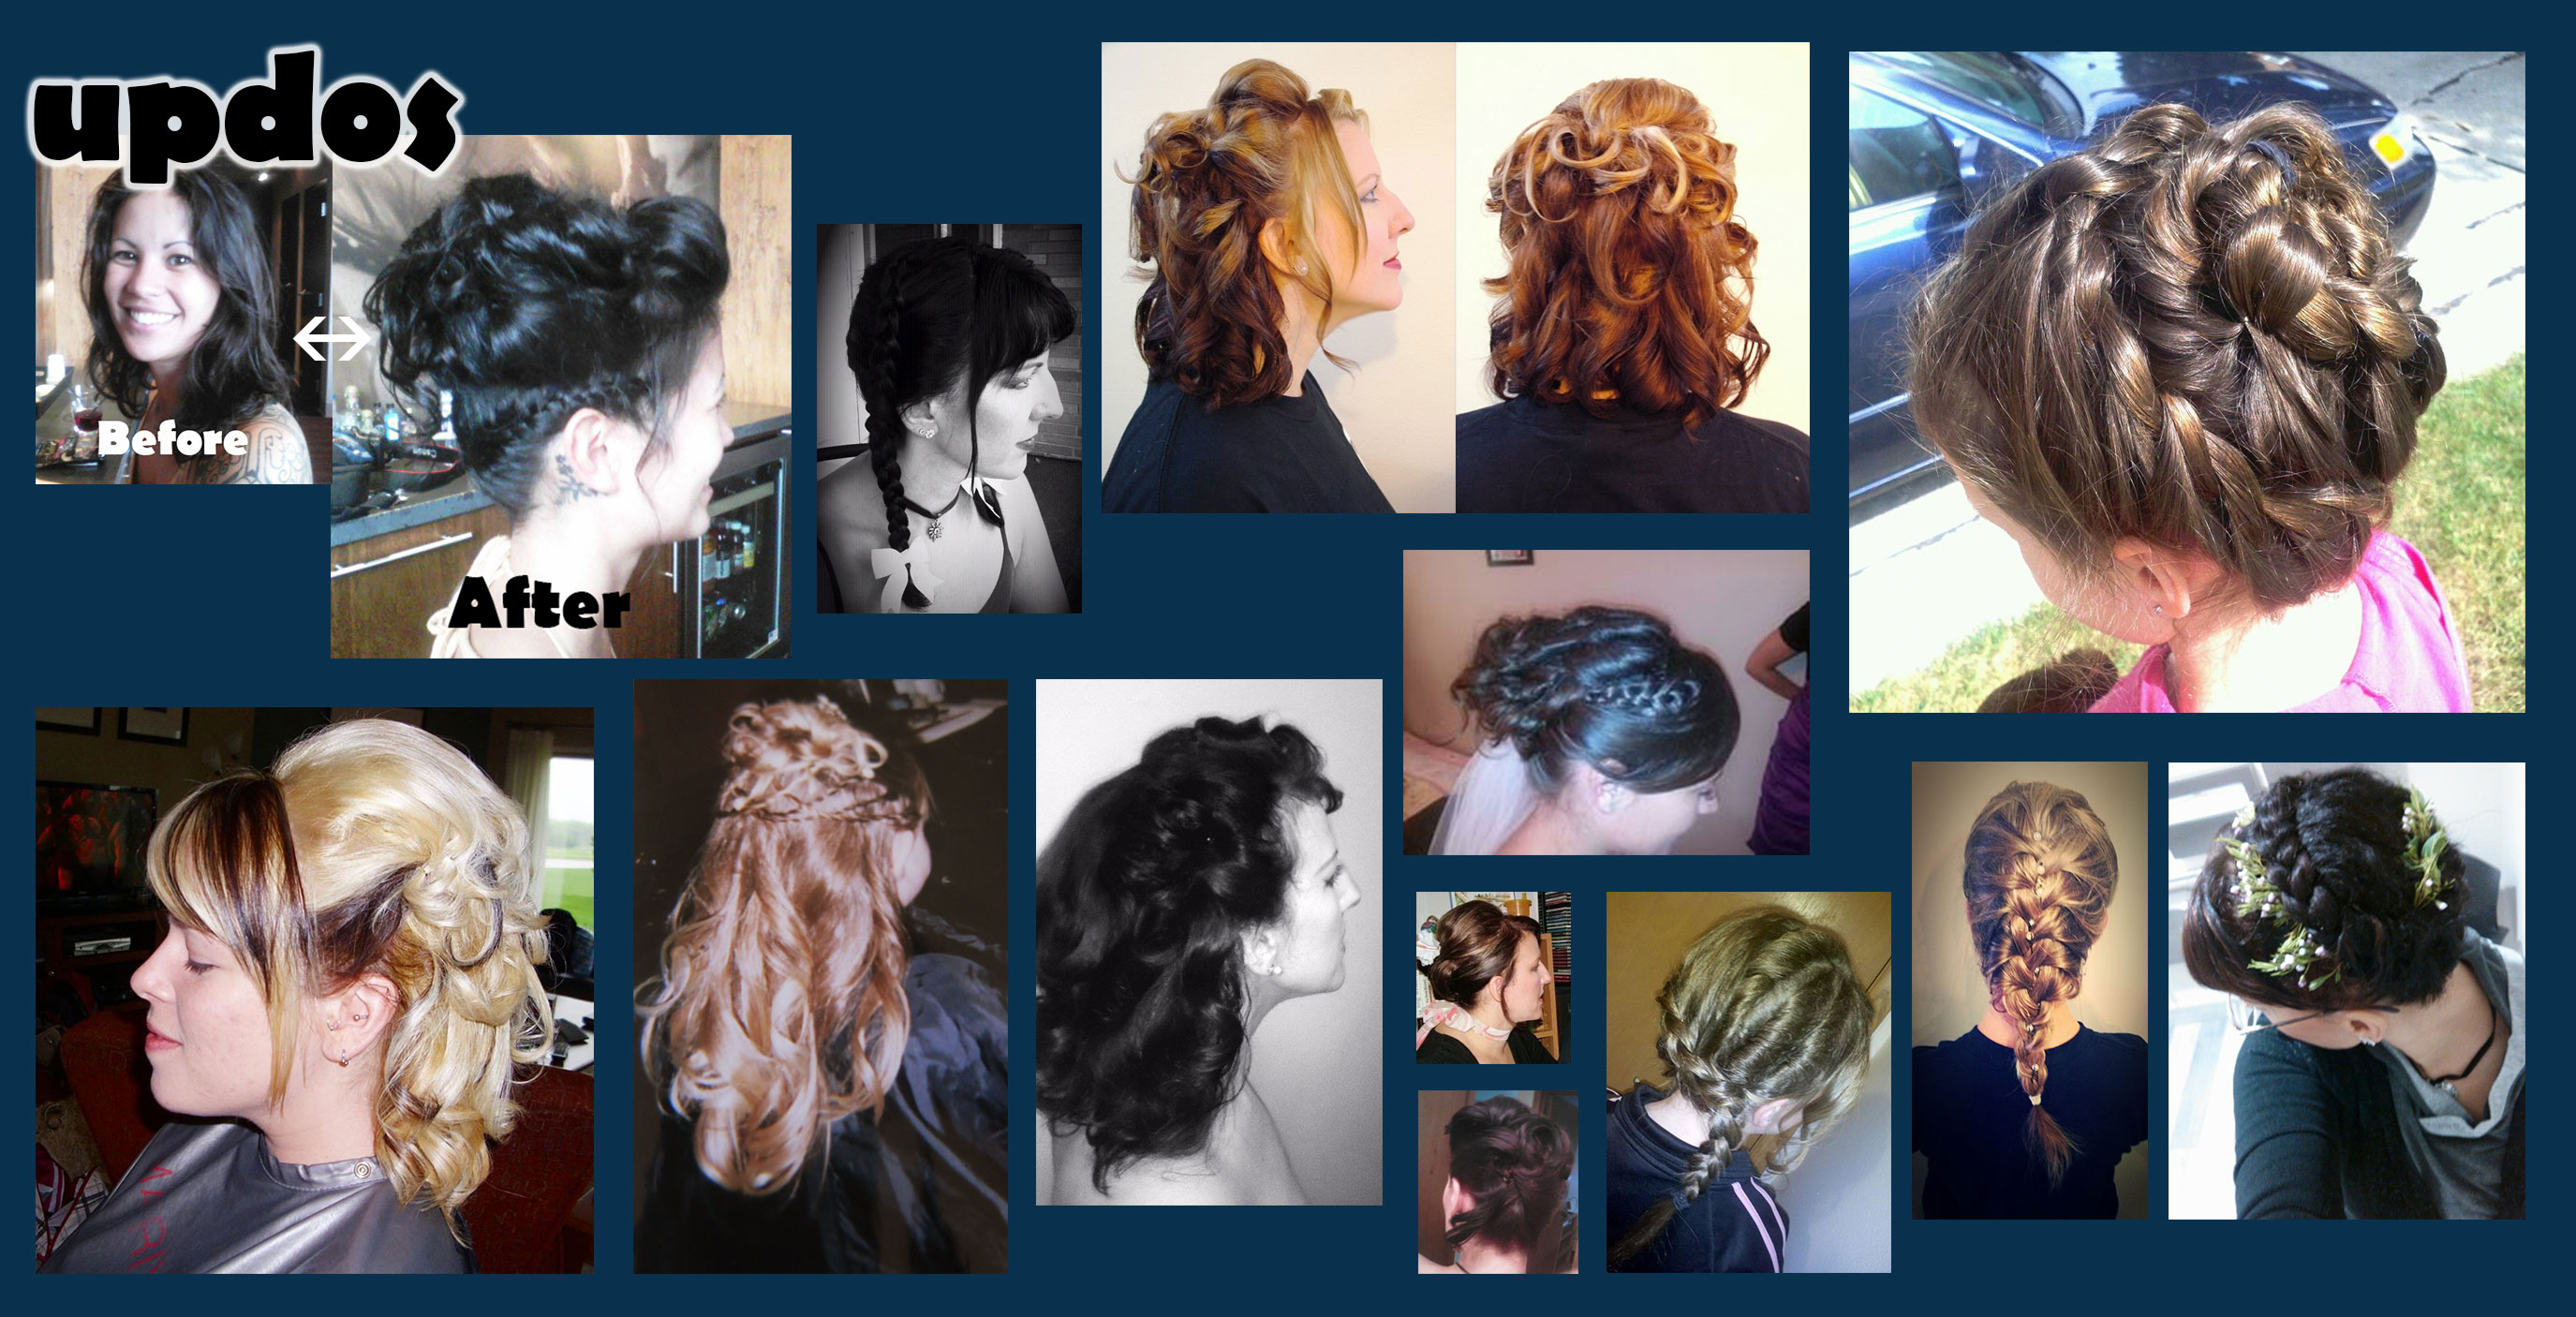 UpDos Collage